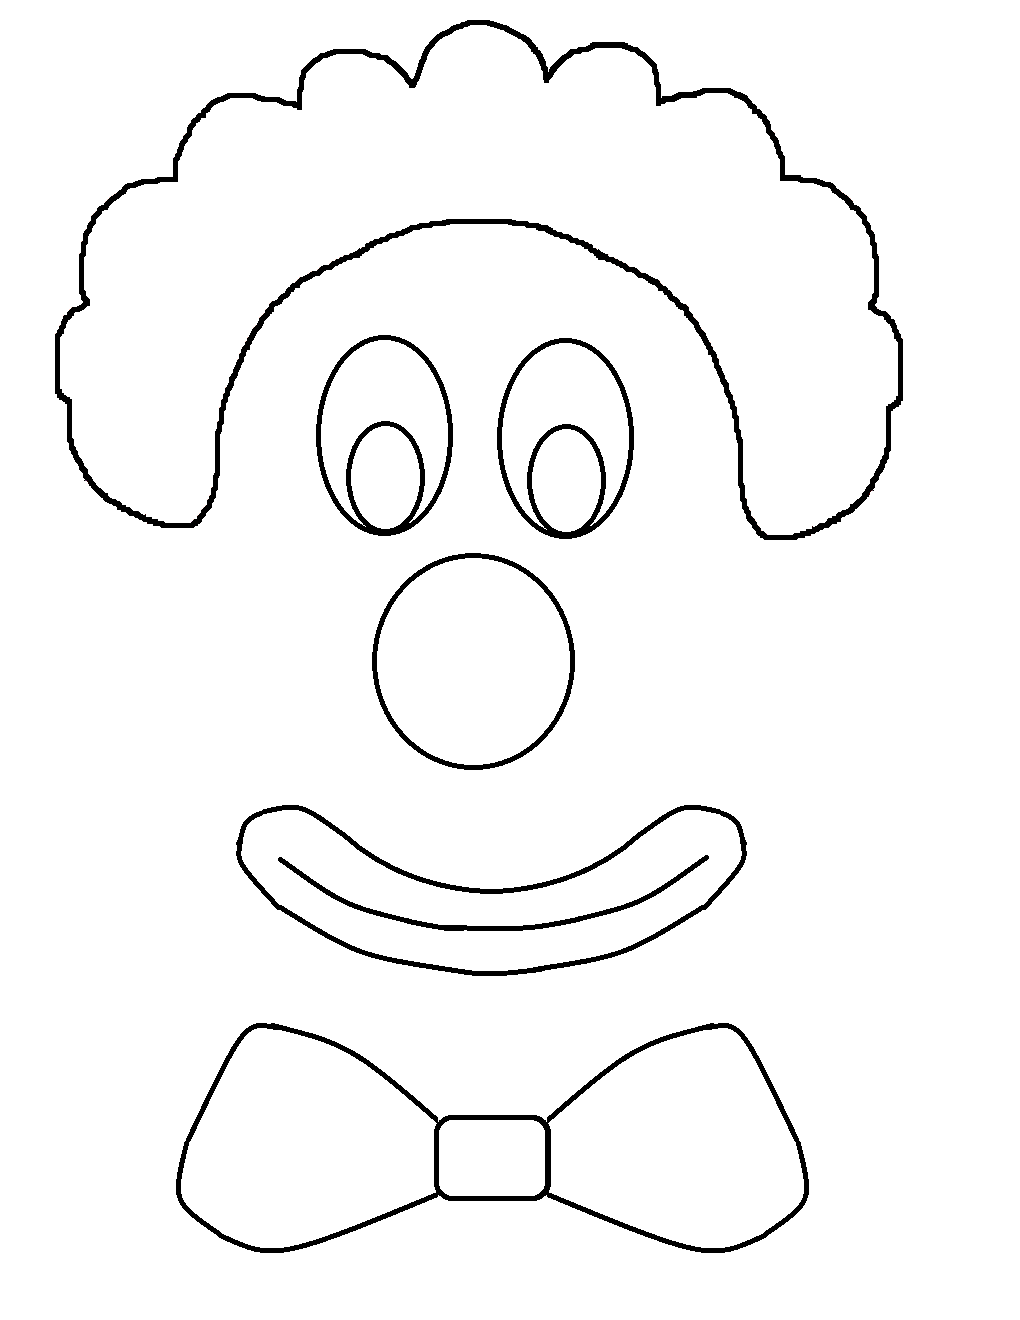 How To Draw A Scary Clown Cliparts.co